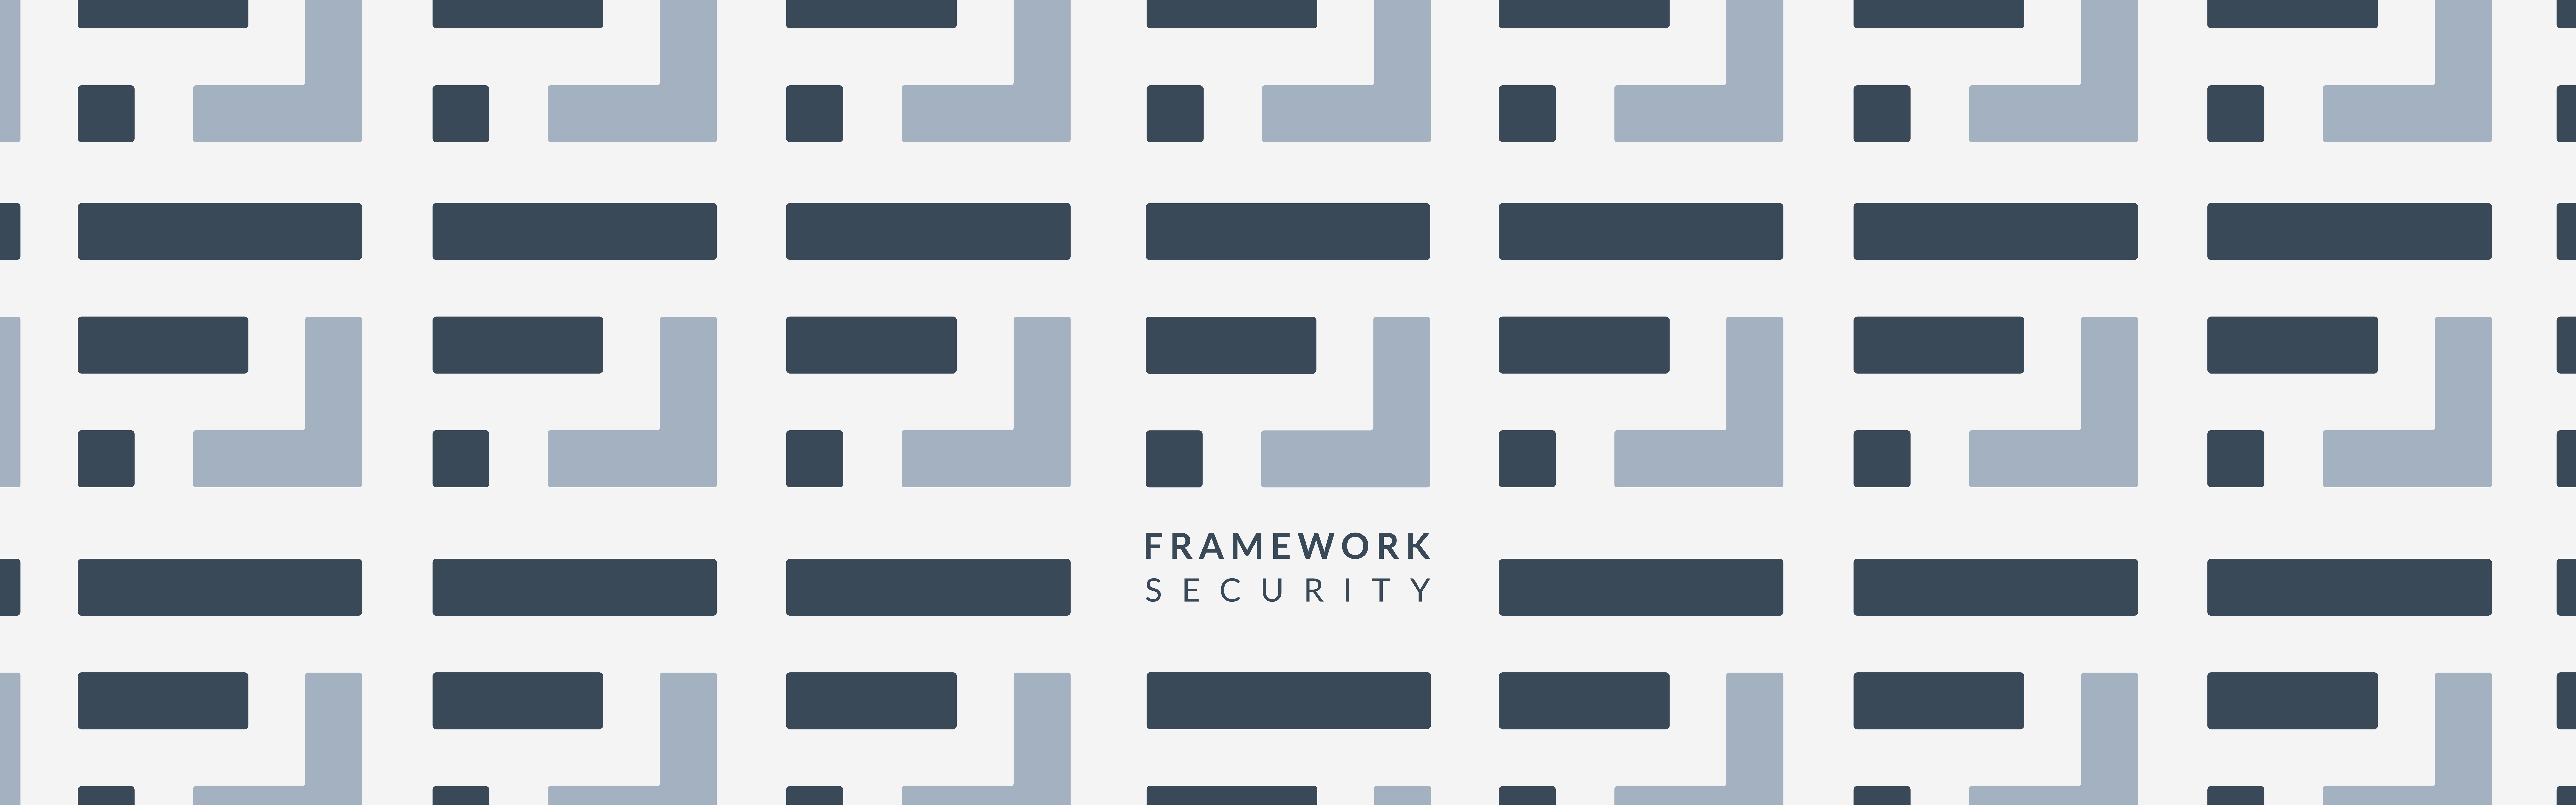 The image displays a repeating pattern of stylized blocks in shades of grey, with the words "FRAMEWORK SECURITY" in capital letters situated at the center bottom.